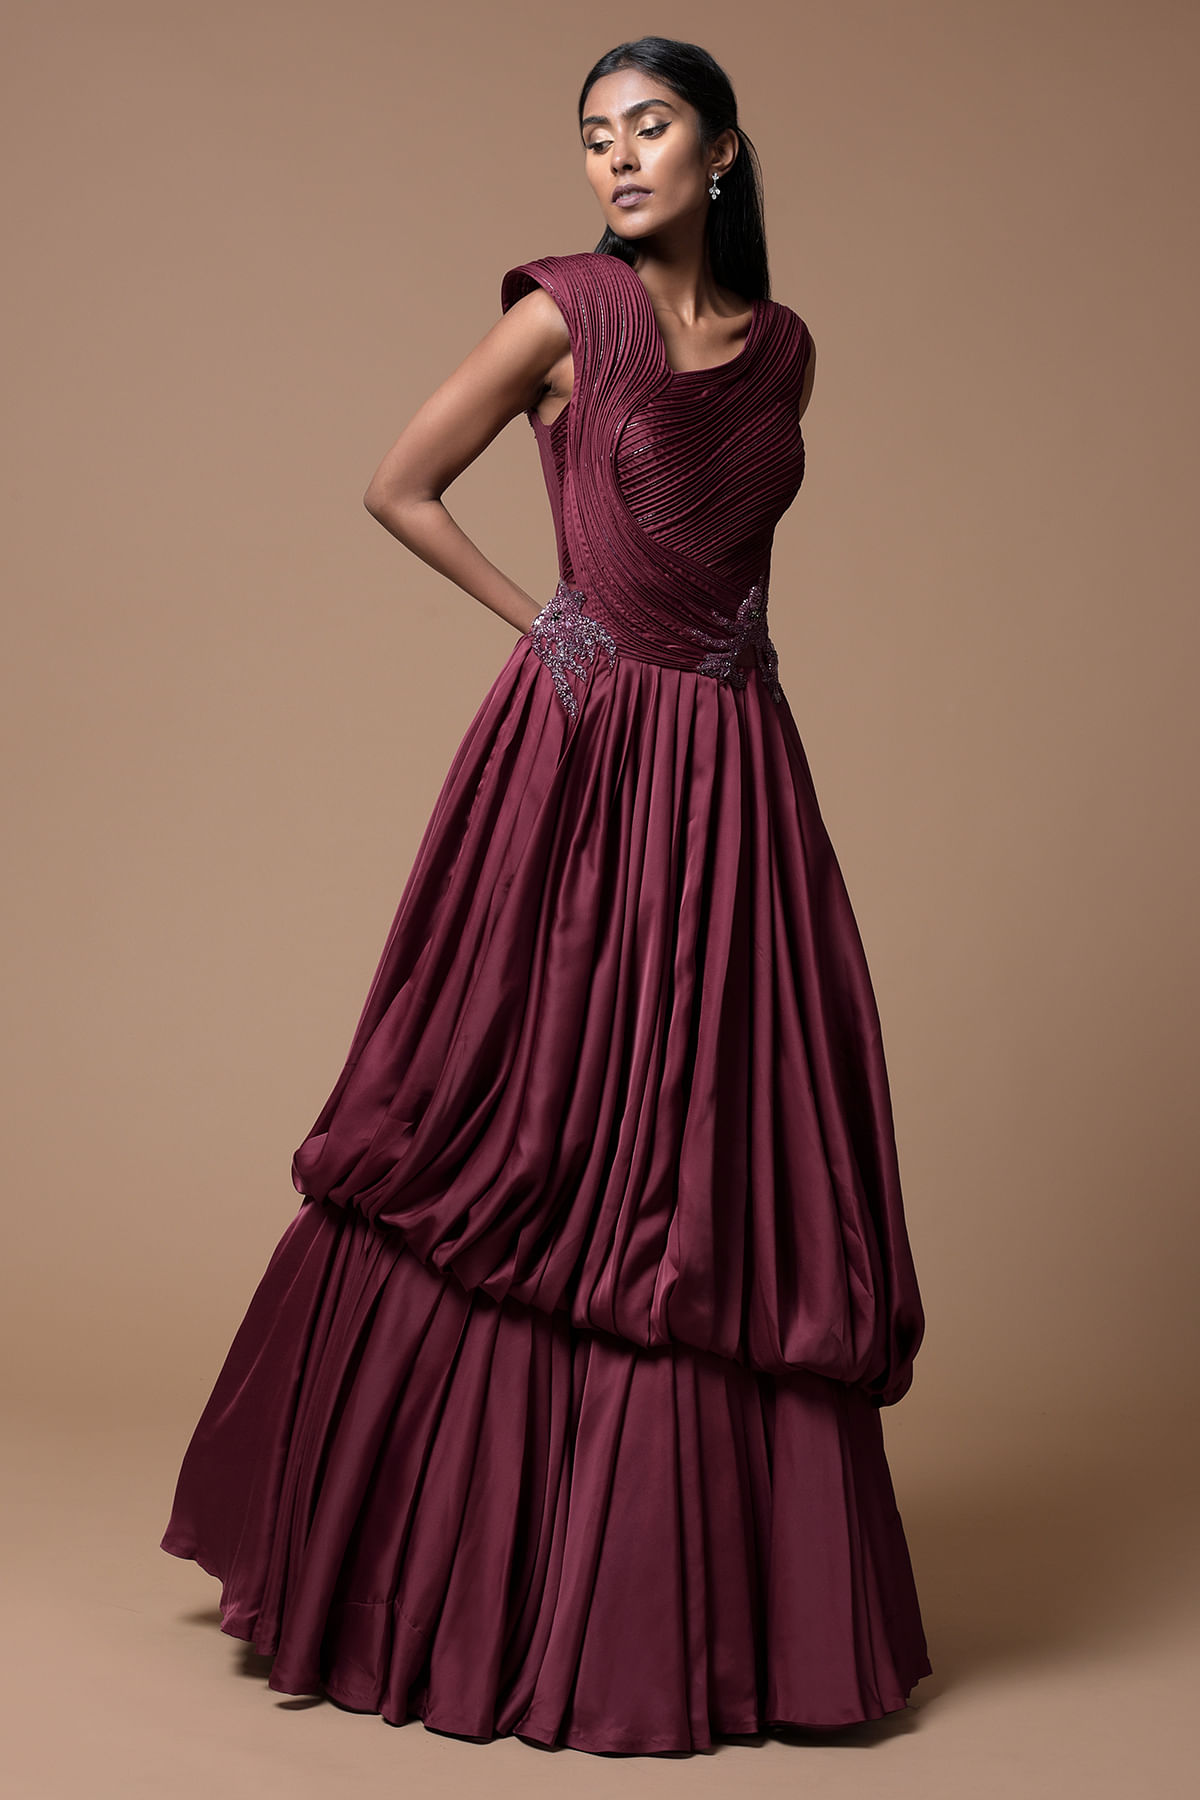 Buy 4Fashion Empire Pure American Crepe With Full Inner Wine Colour Gown  Size:- XXXL at Amazon.in